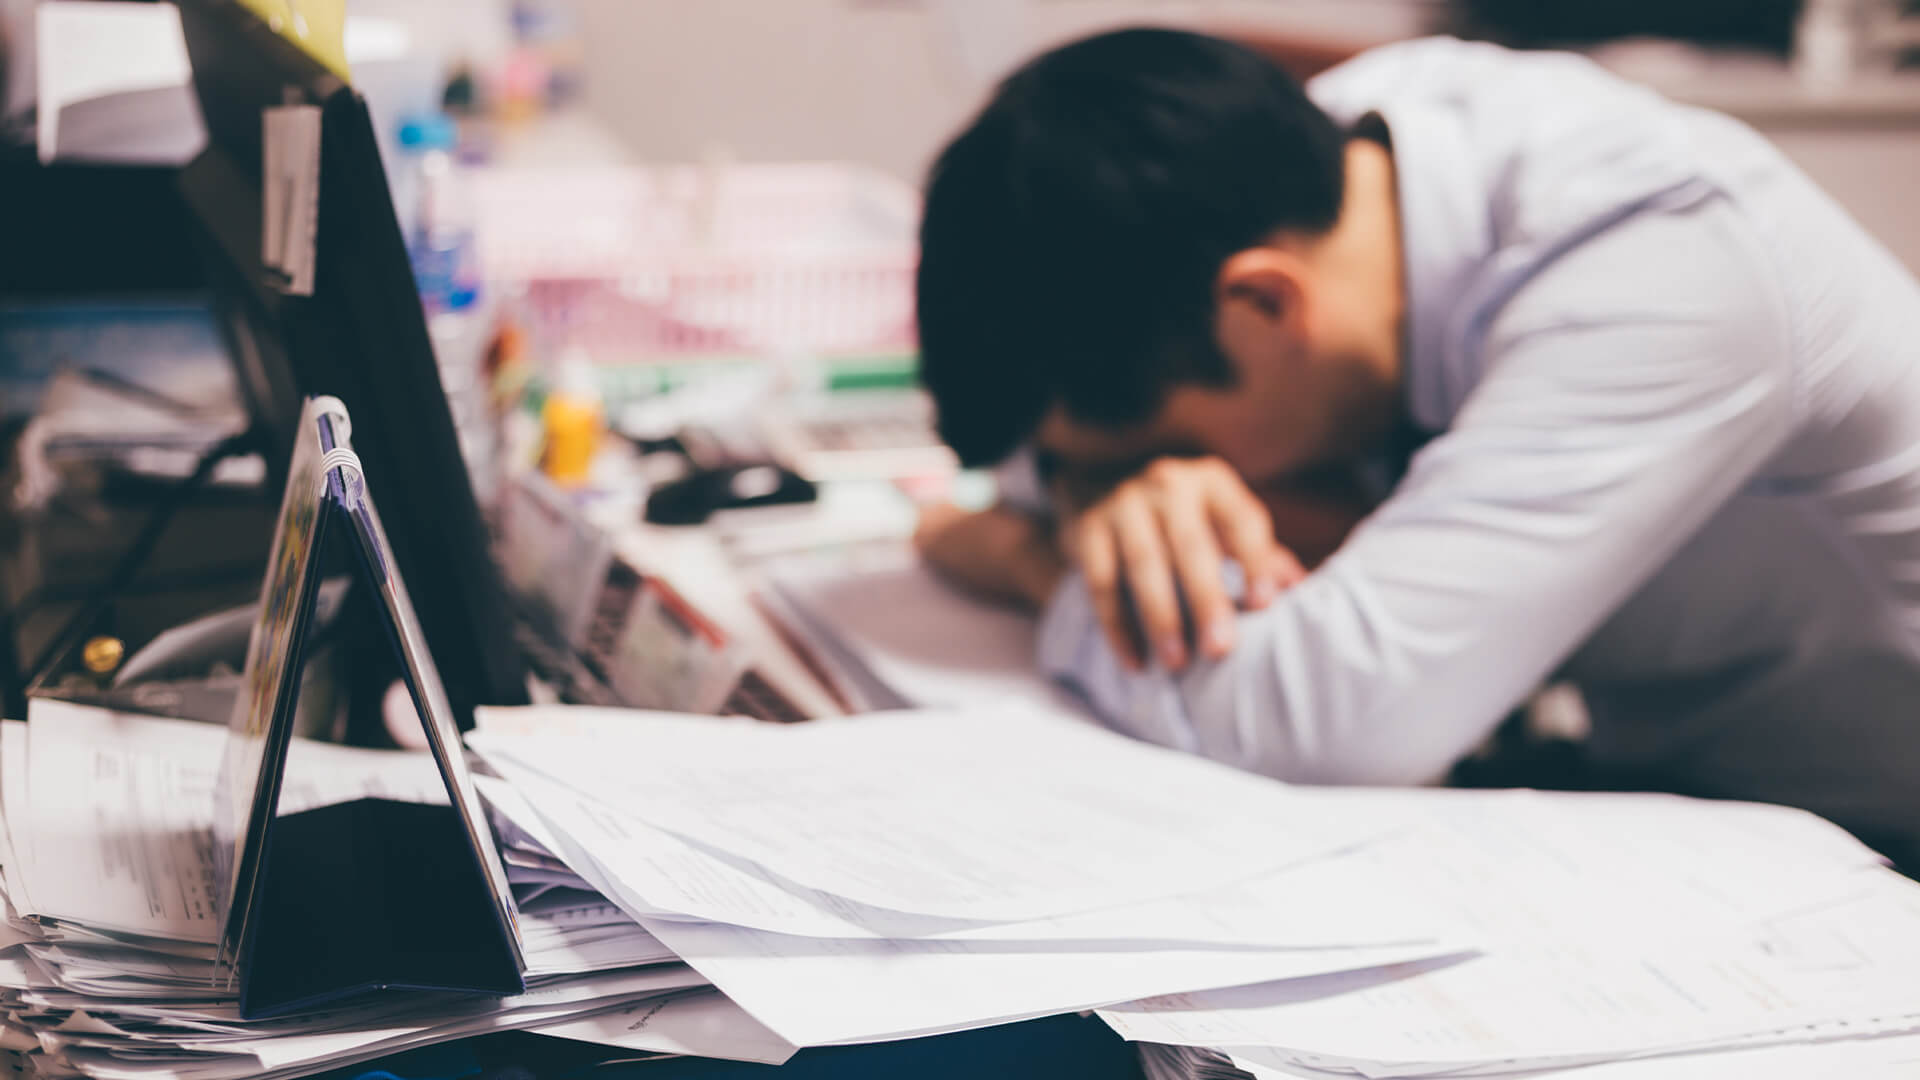 National Stress Awareness Week 2021: How to Overcome Occupational Stress